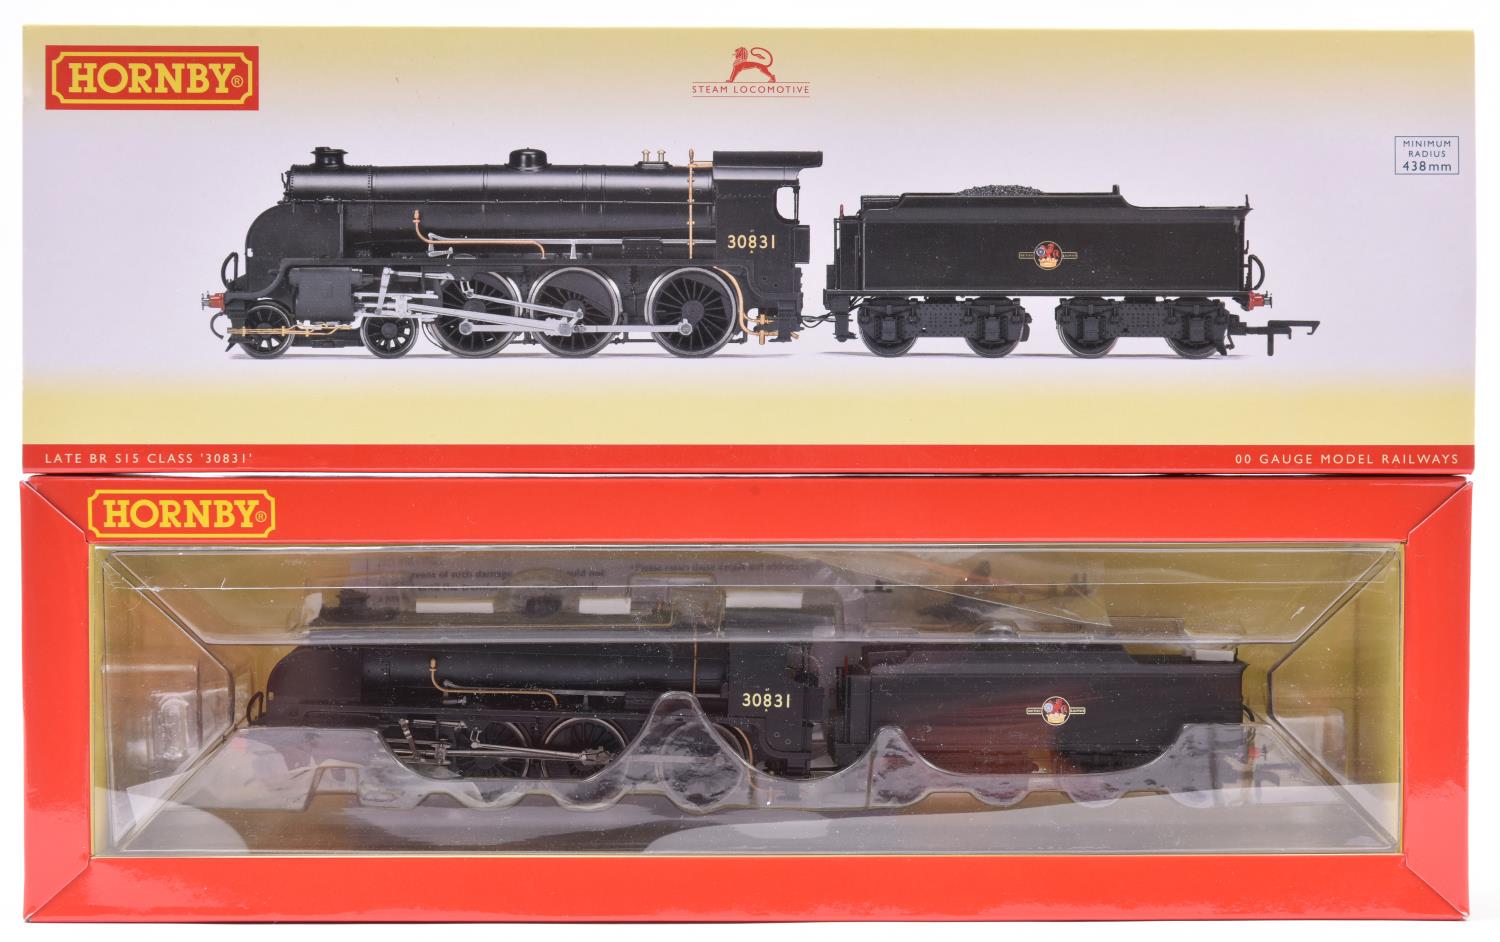 A Hornby British Railways SR class S15 4-6-0 tender locomotive (R3413). In late crest unlined